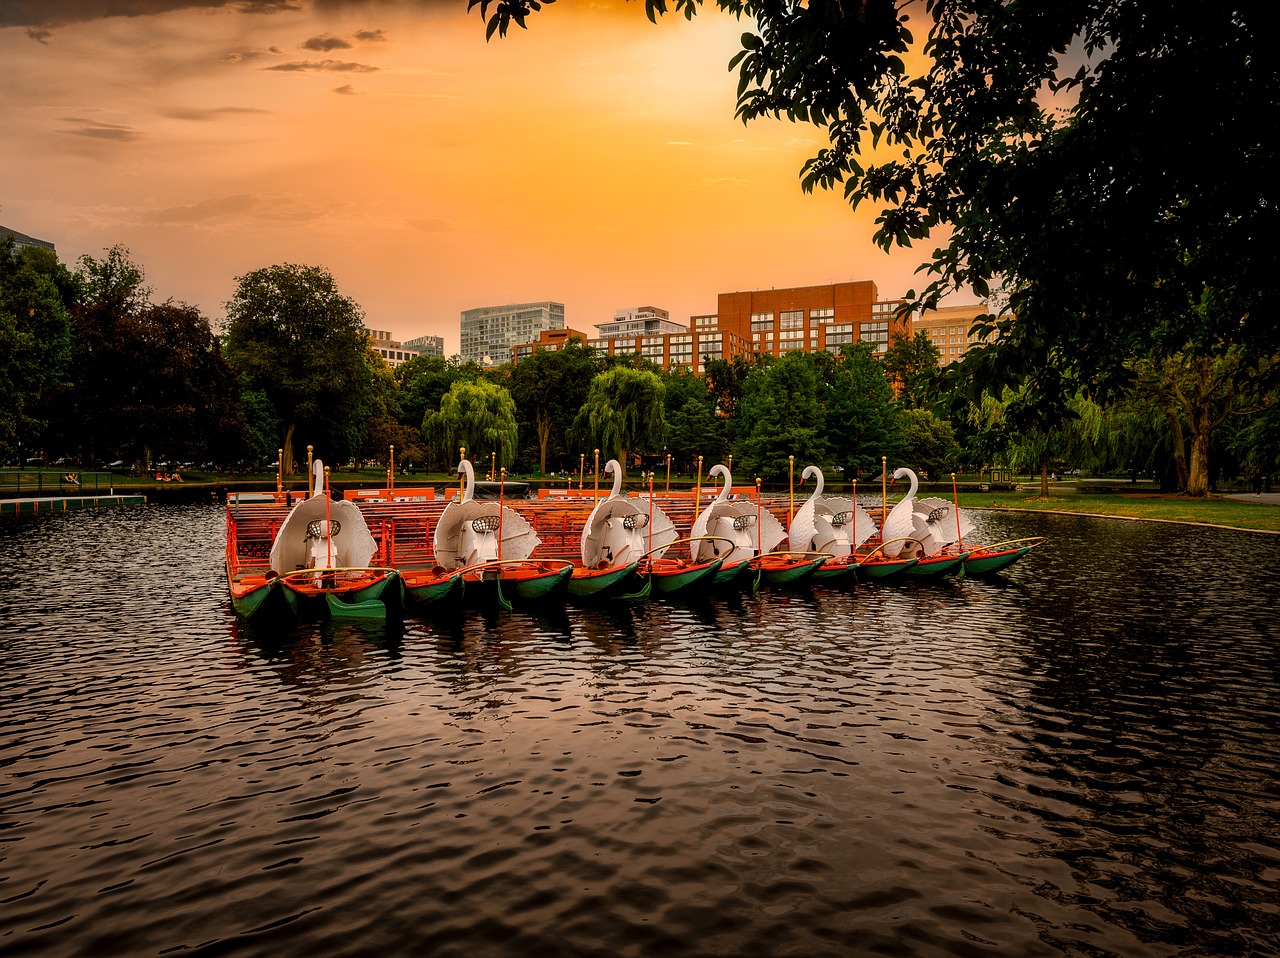 Boston Public Garden at sunset with the swan boats.